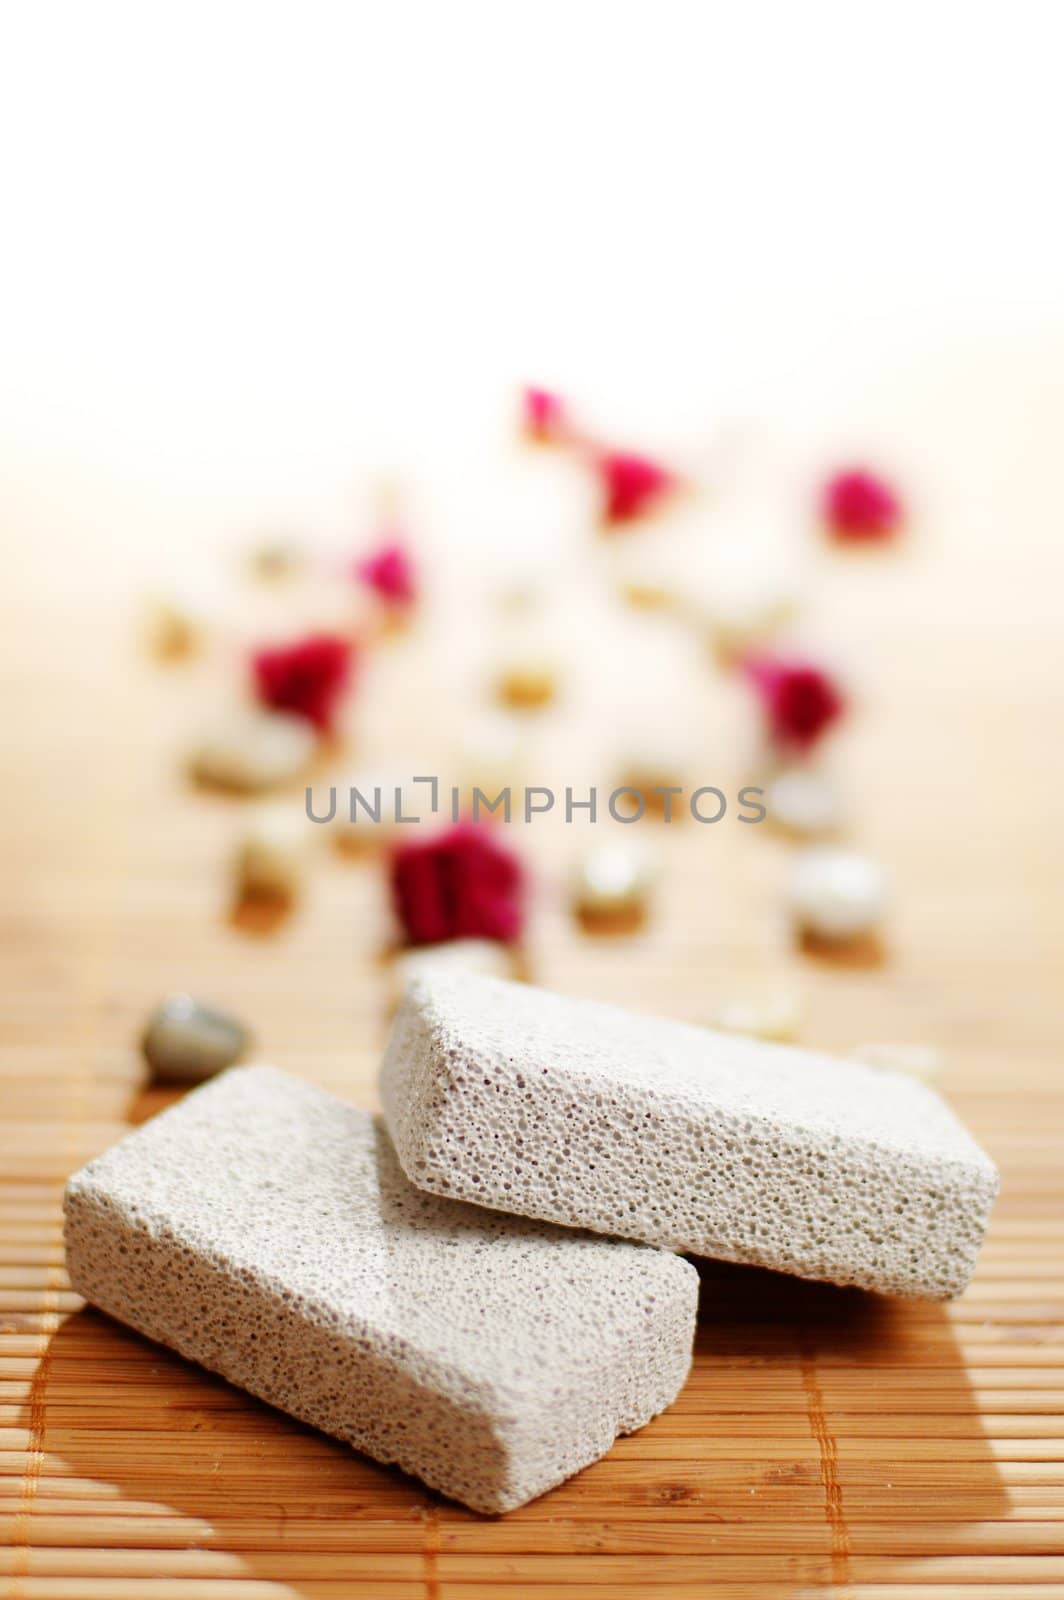 Pumice stones on top of a bamboo mat.